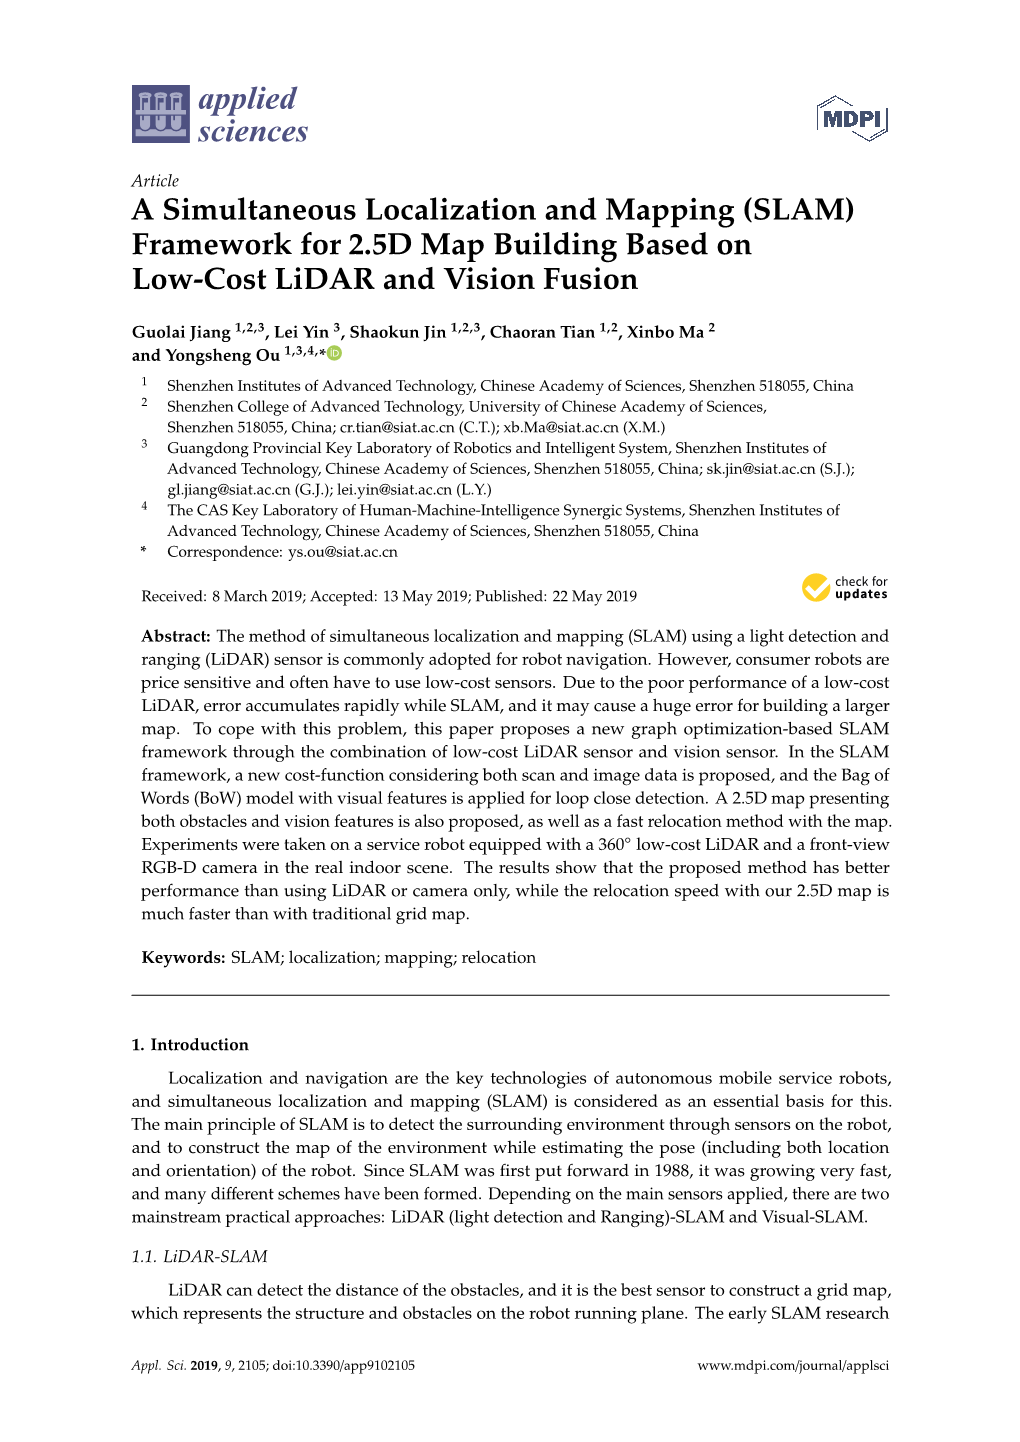 A Simultaneous Localization and Mapping (SLAM) Framework for 2.5D Map Building Based on Low-Cost Lidar and Vision Fusion